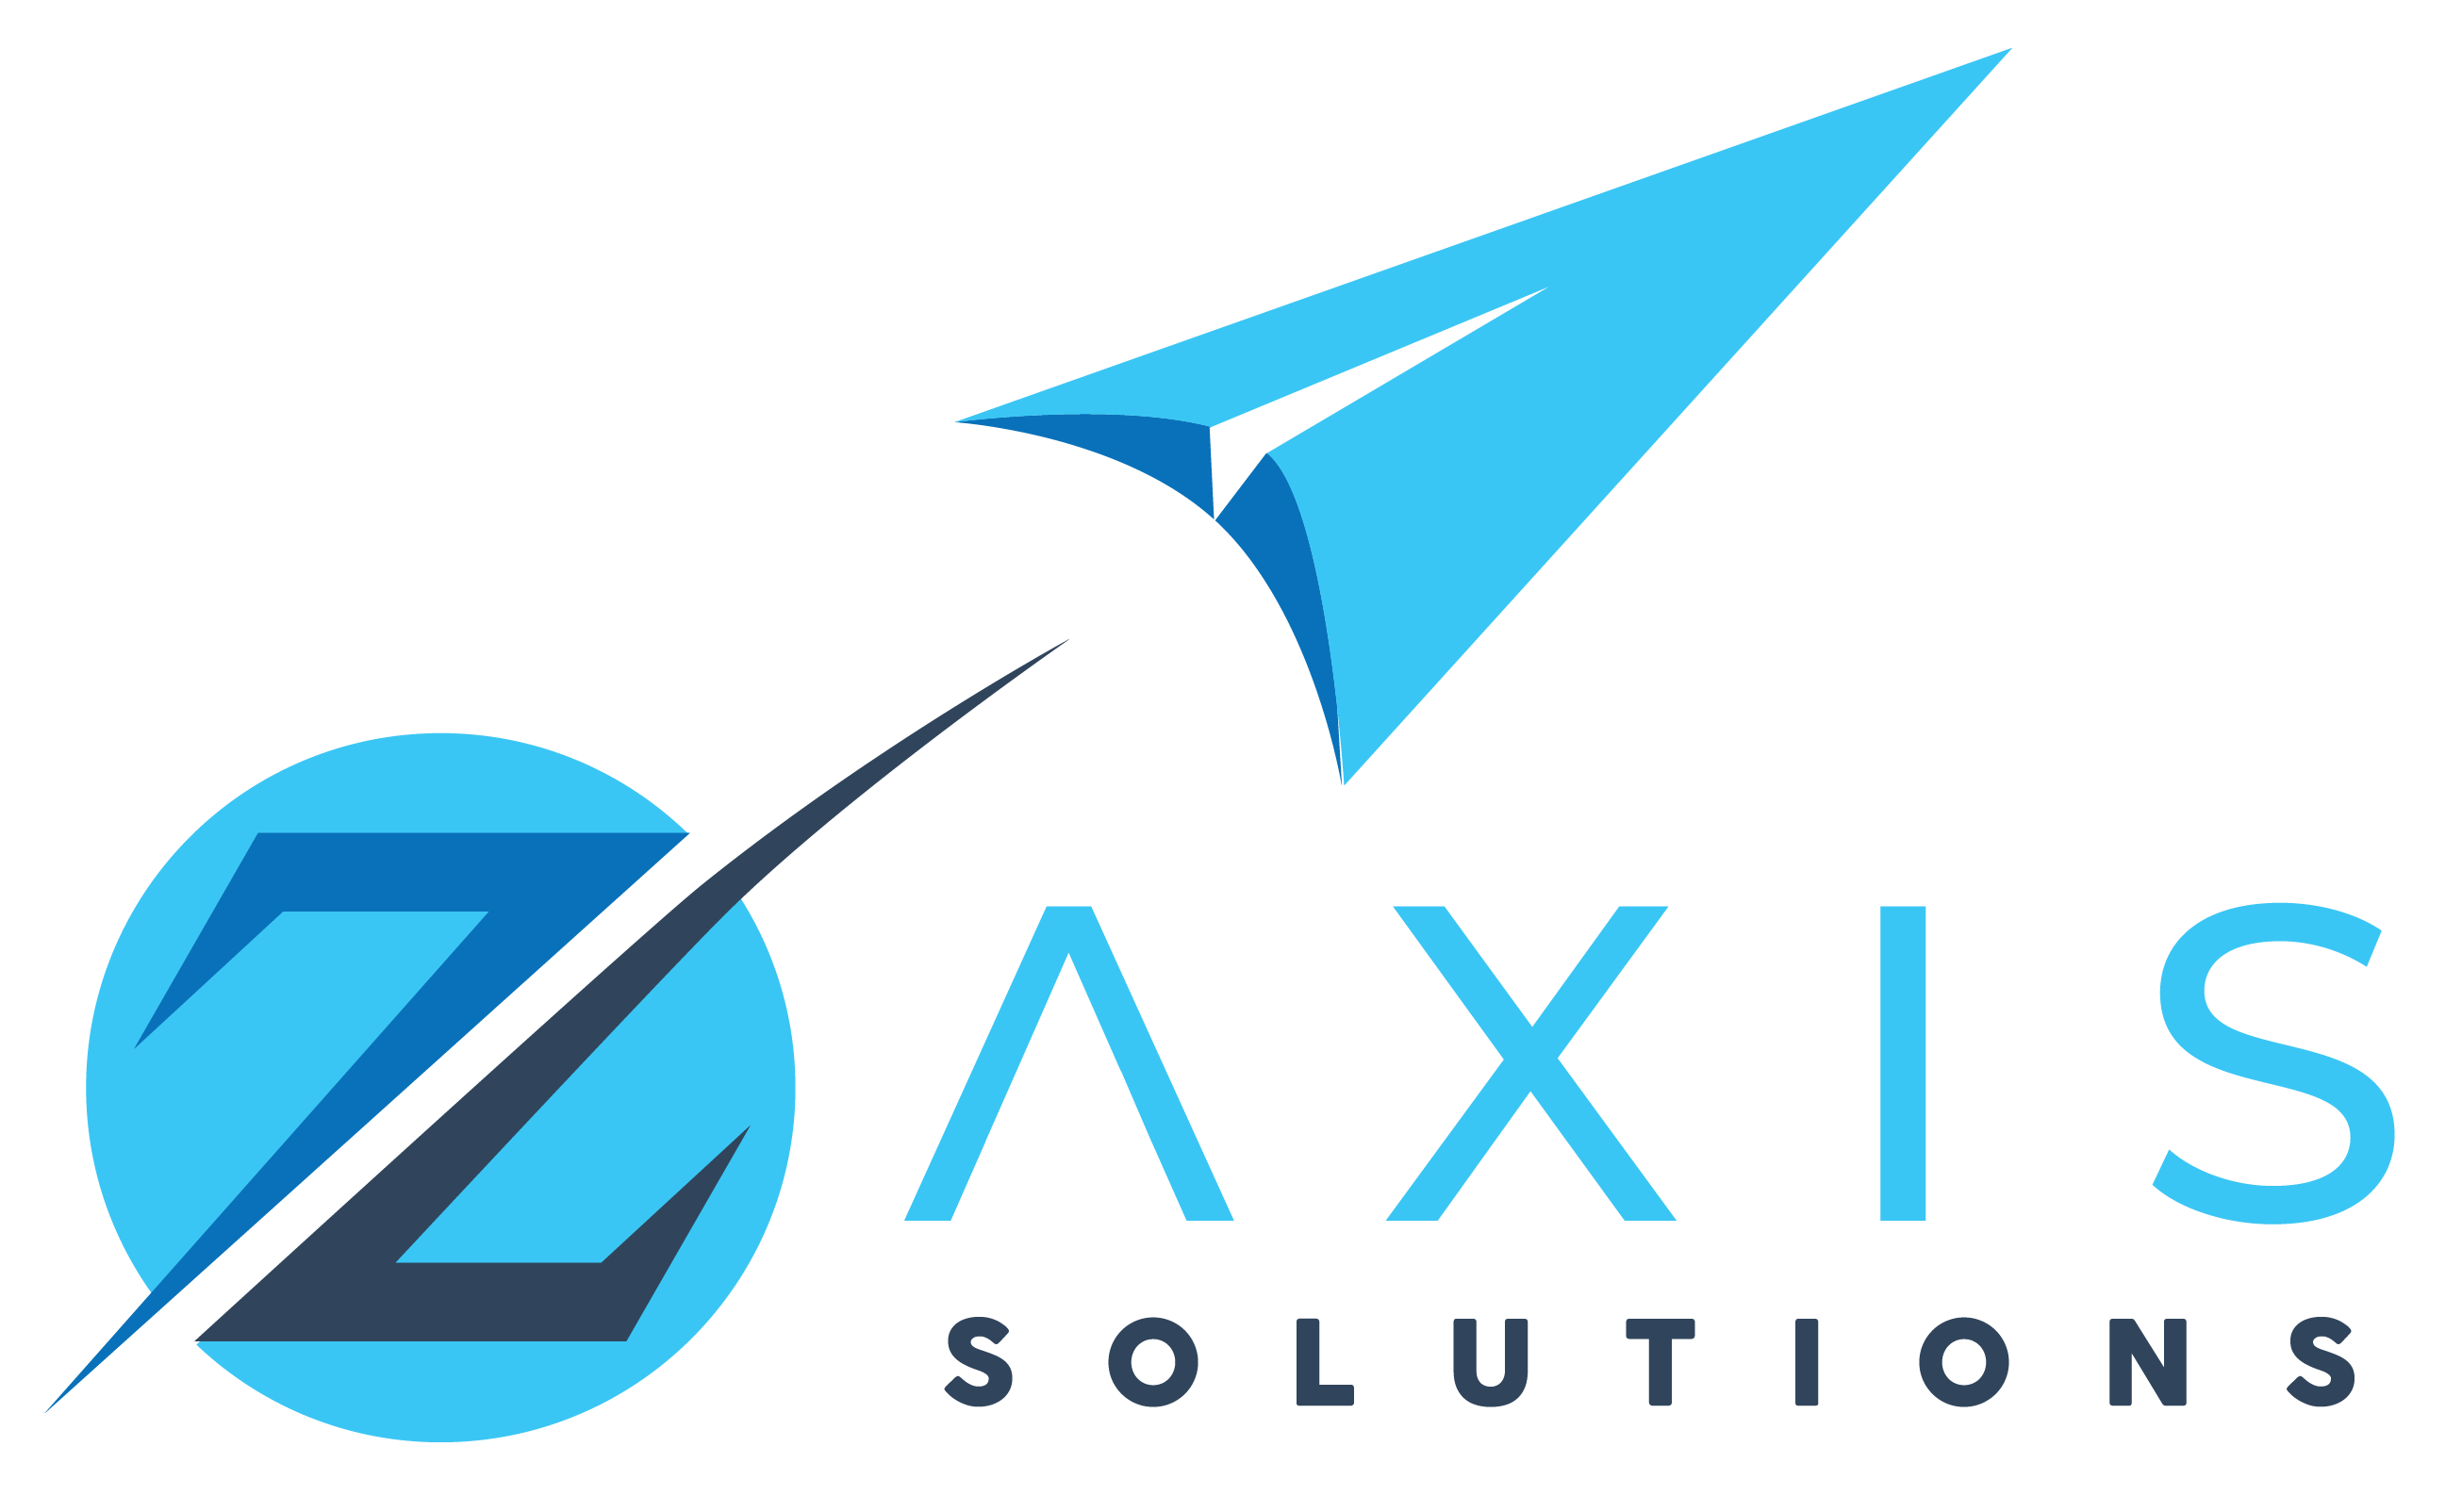 Z Axis Solutions guarantees results with its innovative lead generation program